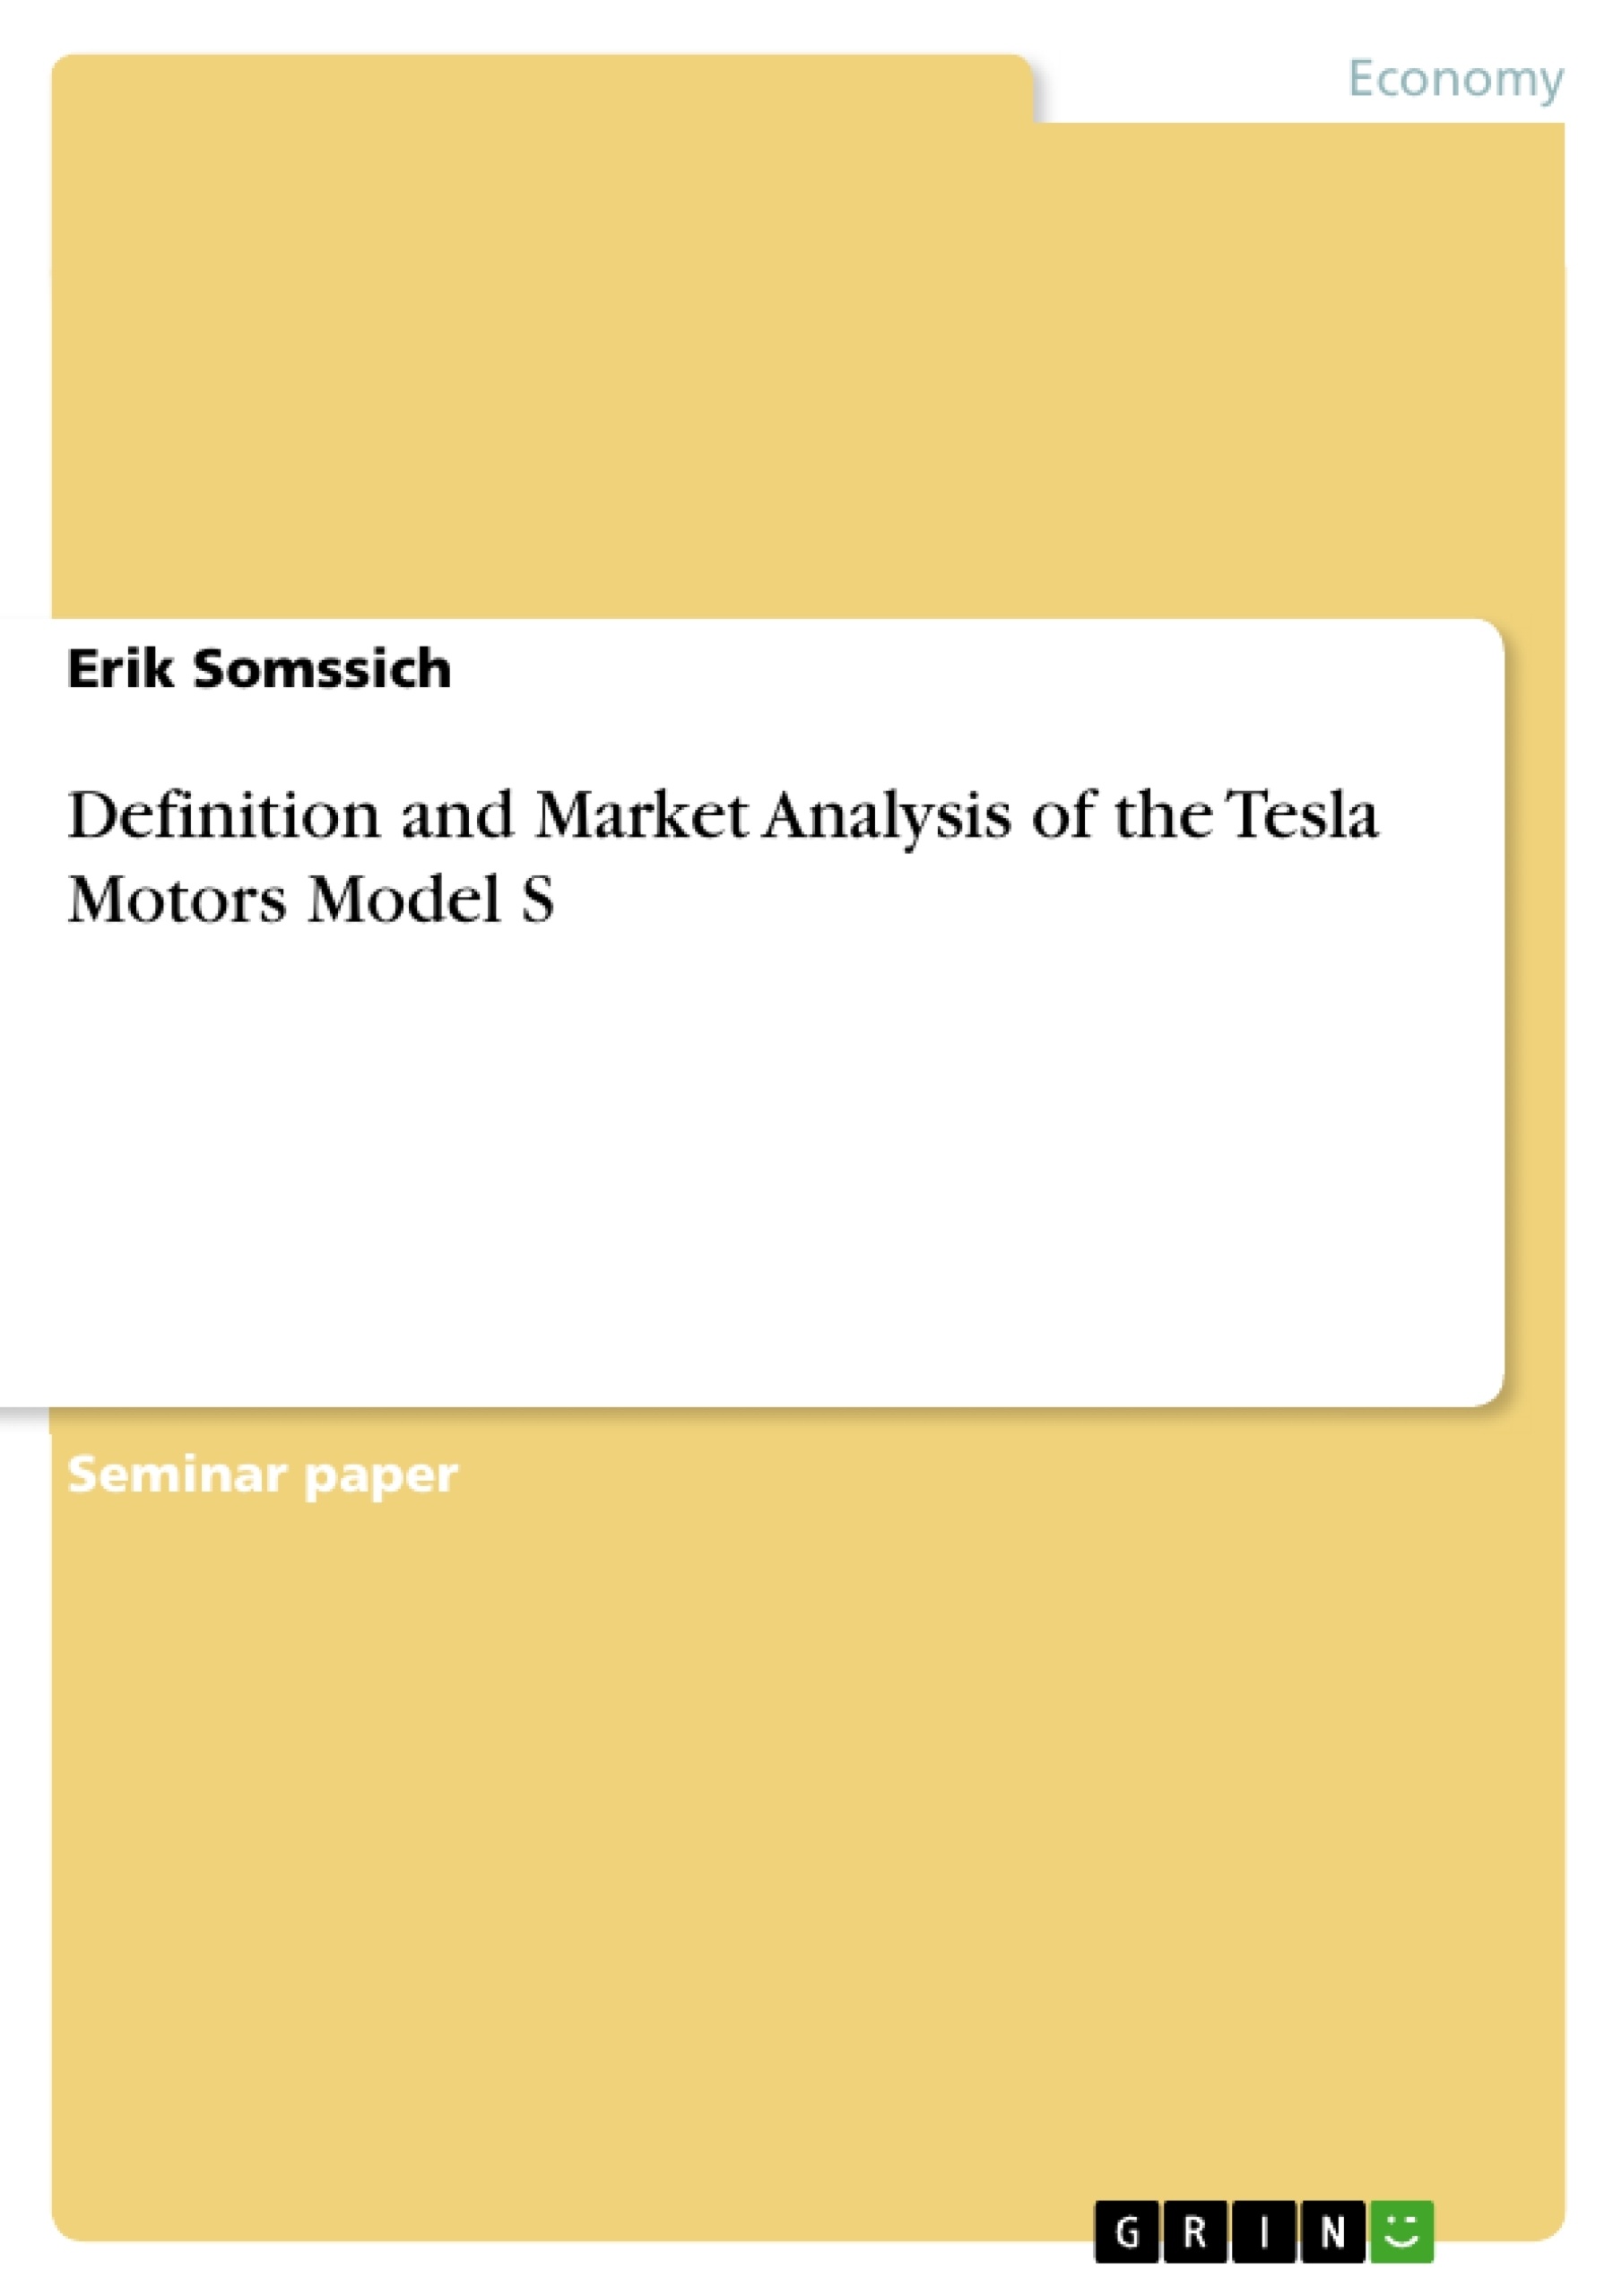 Title: Definition and Market Analysis of the Tesla Motors Model S